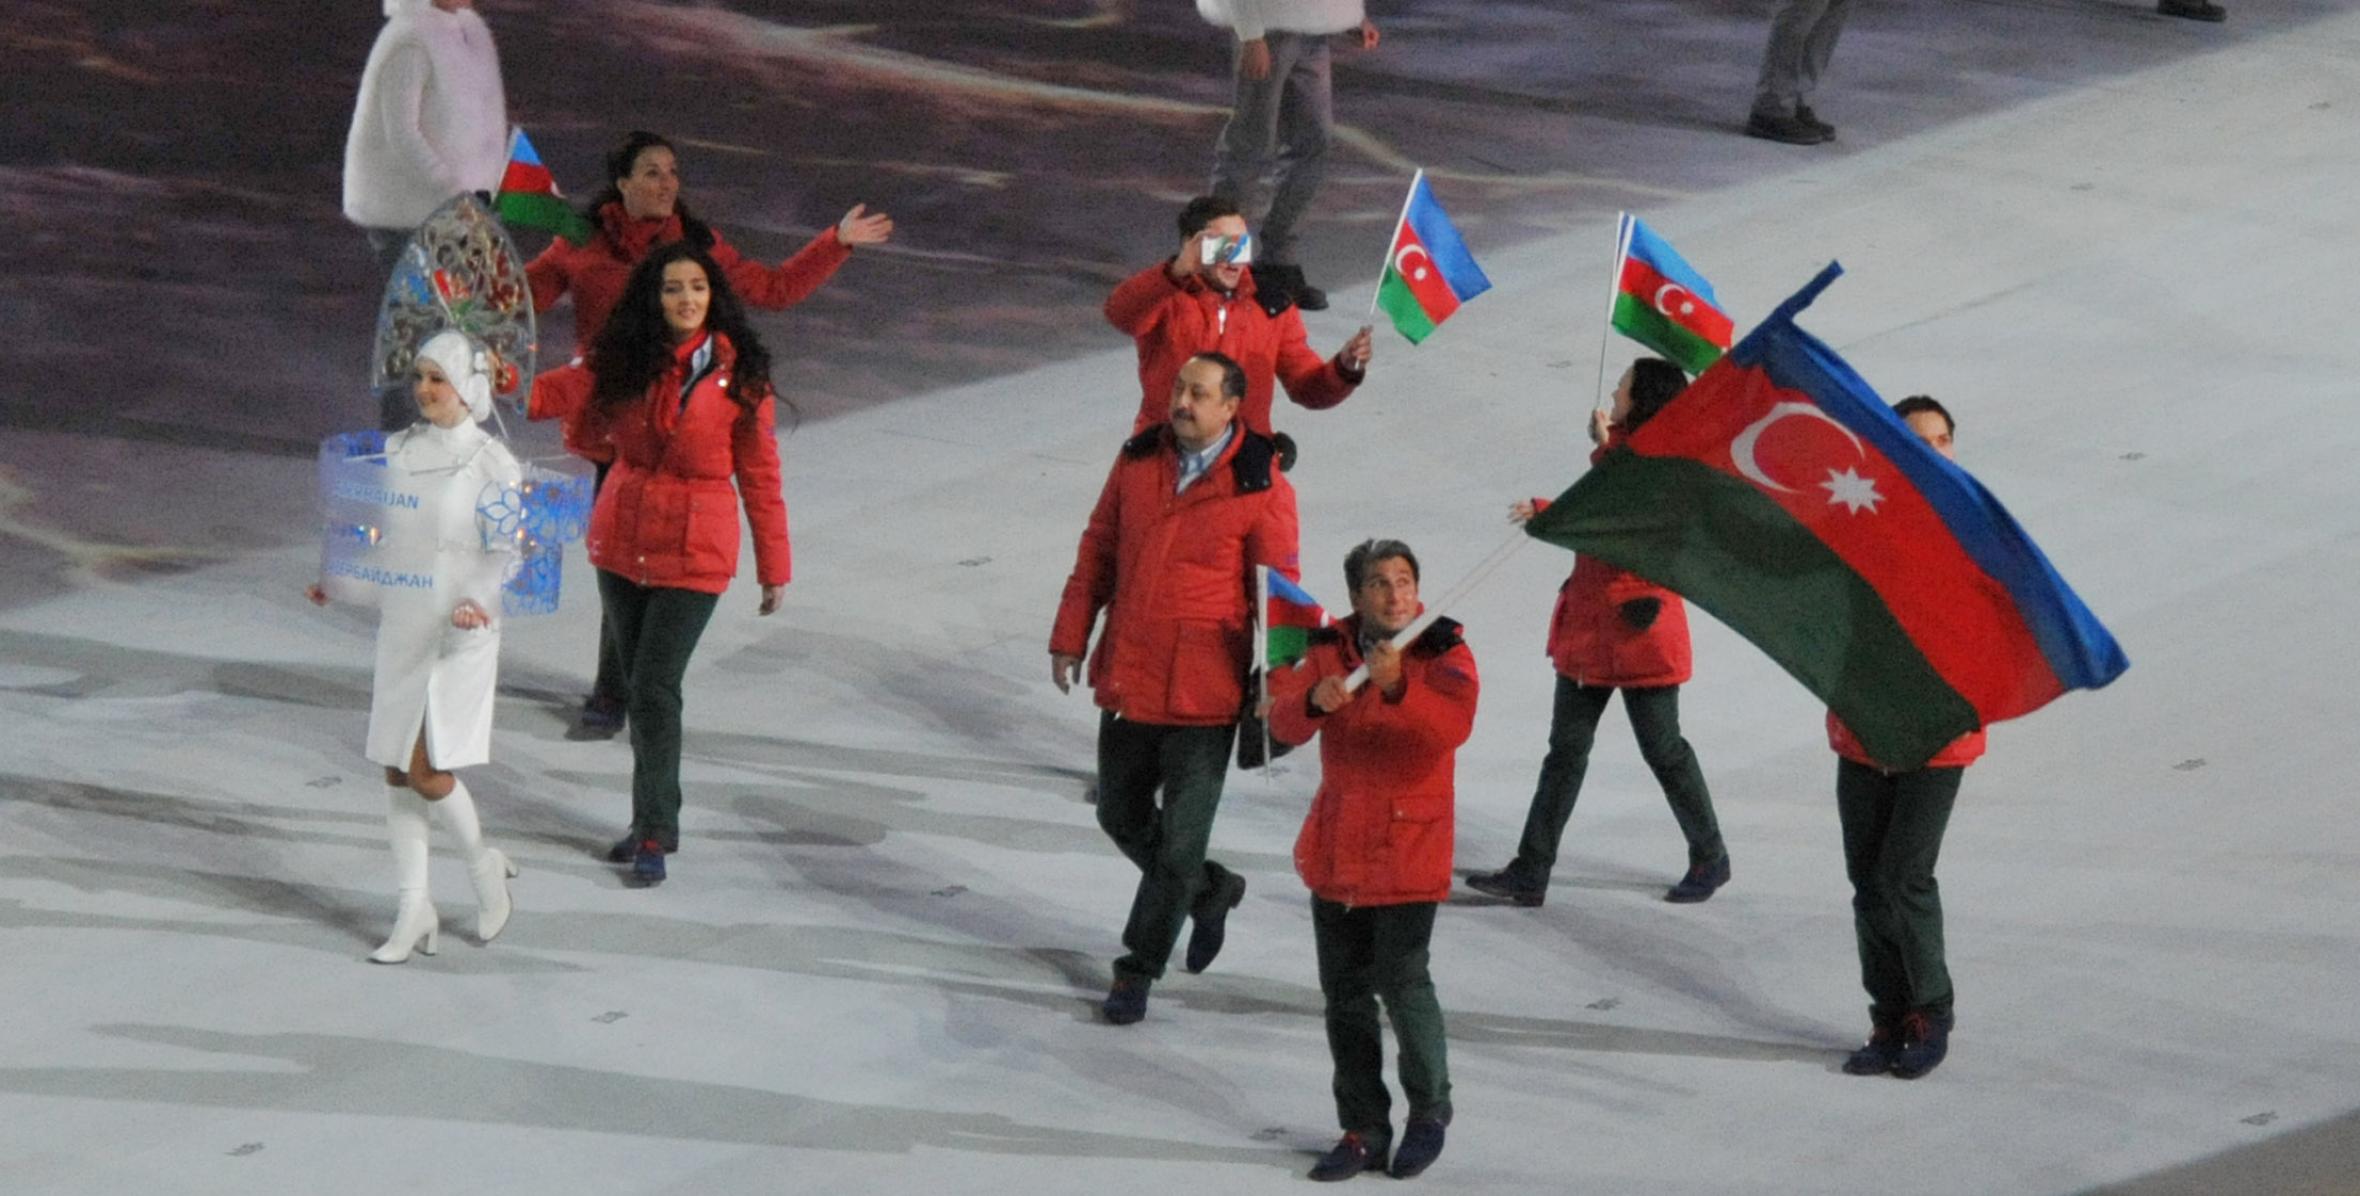 Ilham Aliyev attended the opening ceremony of the XXII Winter Olympic Games